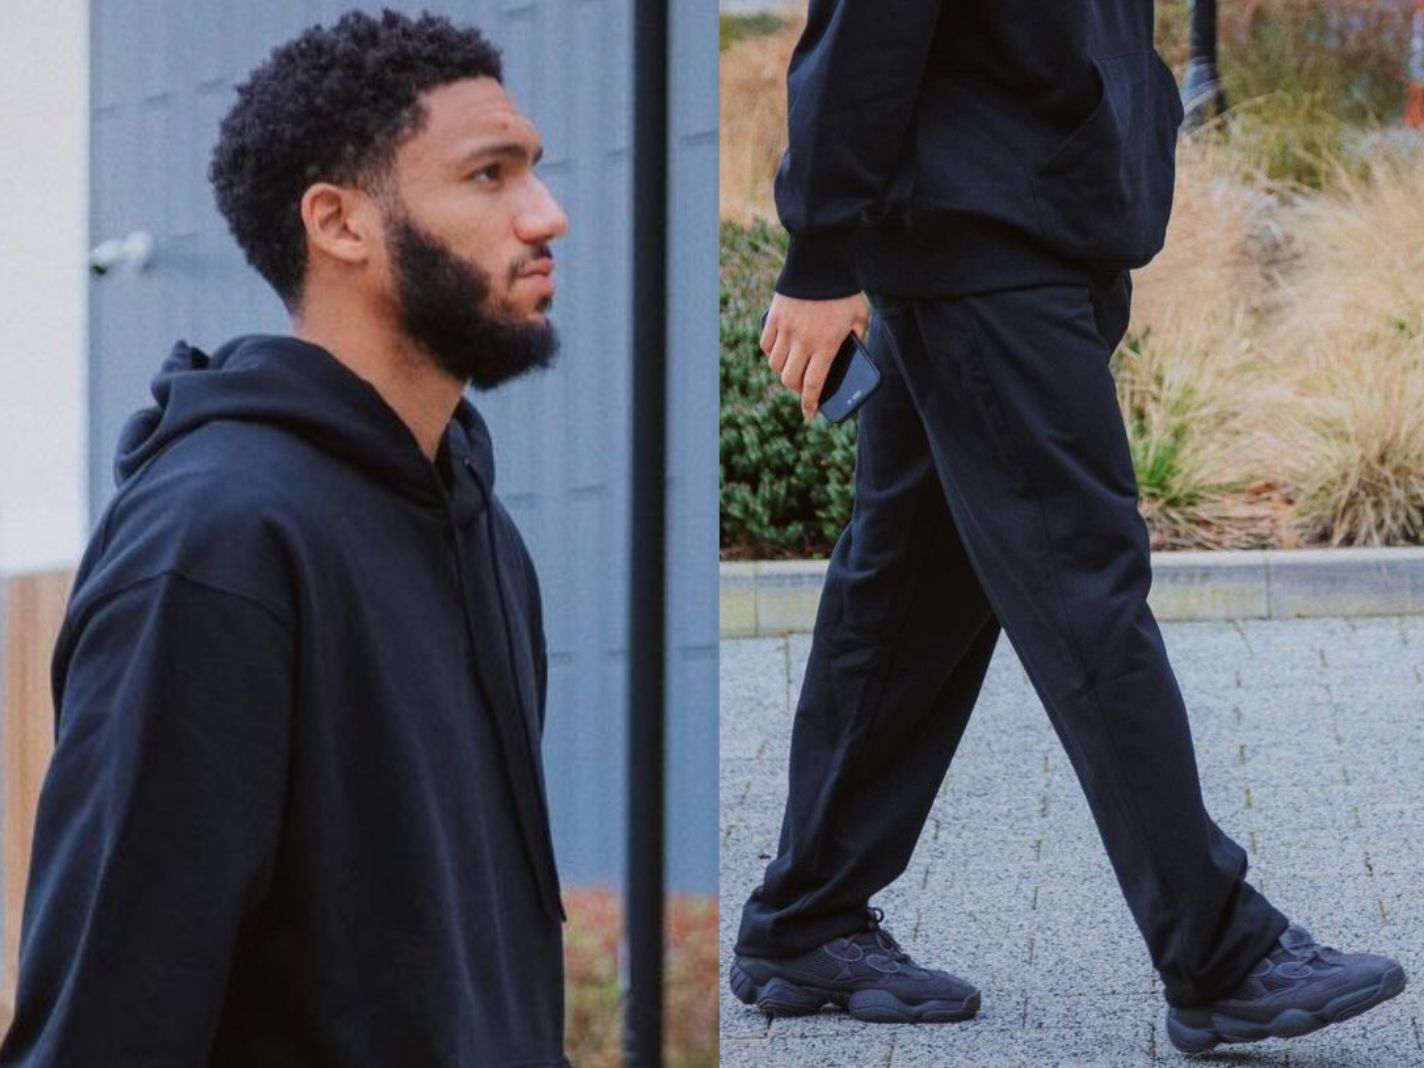 Joe Gomez Serves Style Goals with Adidas Yeezy 500 Utility Black Sneakers – Discover Its Price and Where to Score a Pair!